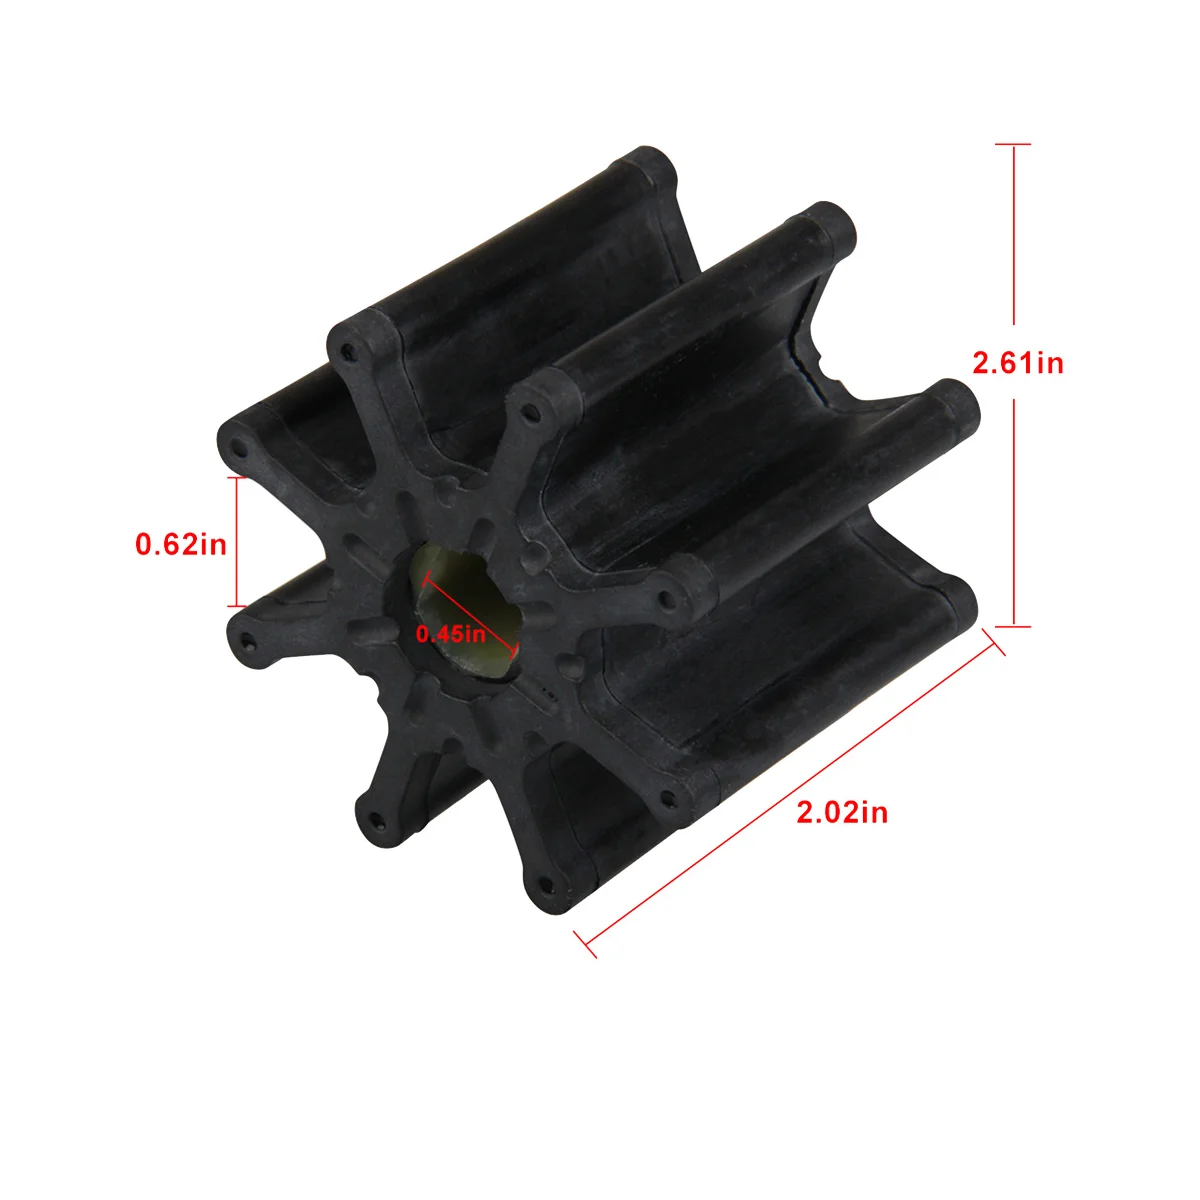 

Water Pump Impeller for Mercruiser Mercury Bravo MAG MPI 4.3-5.0L 5.7/6.2/8.1L Outboard Motor Boat Parts & Accessories